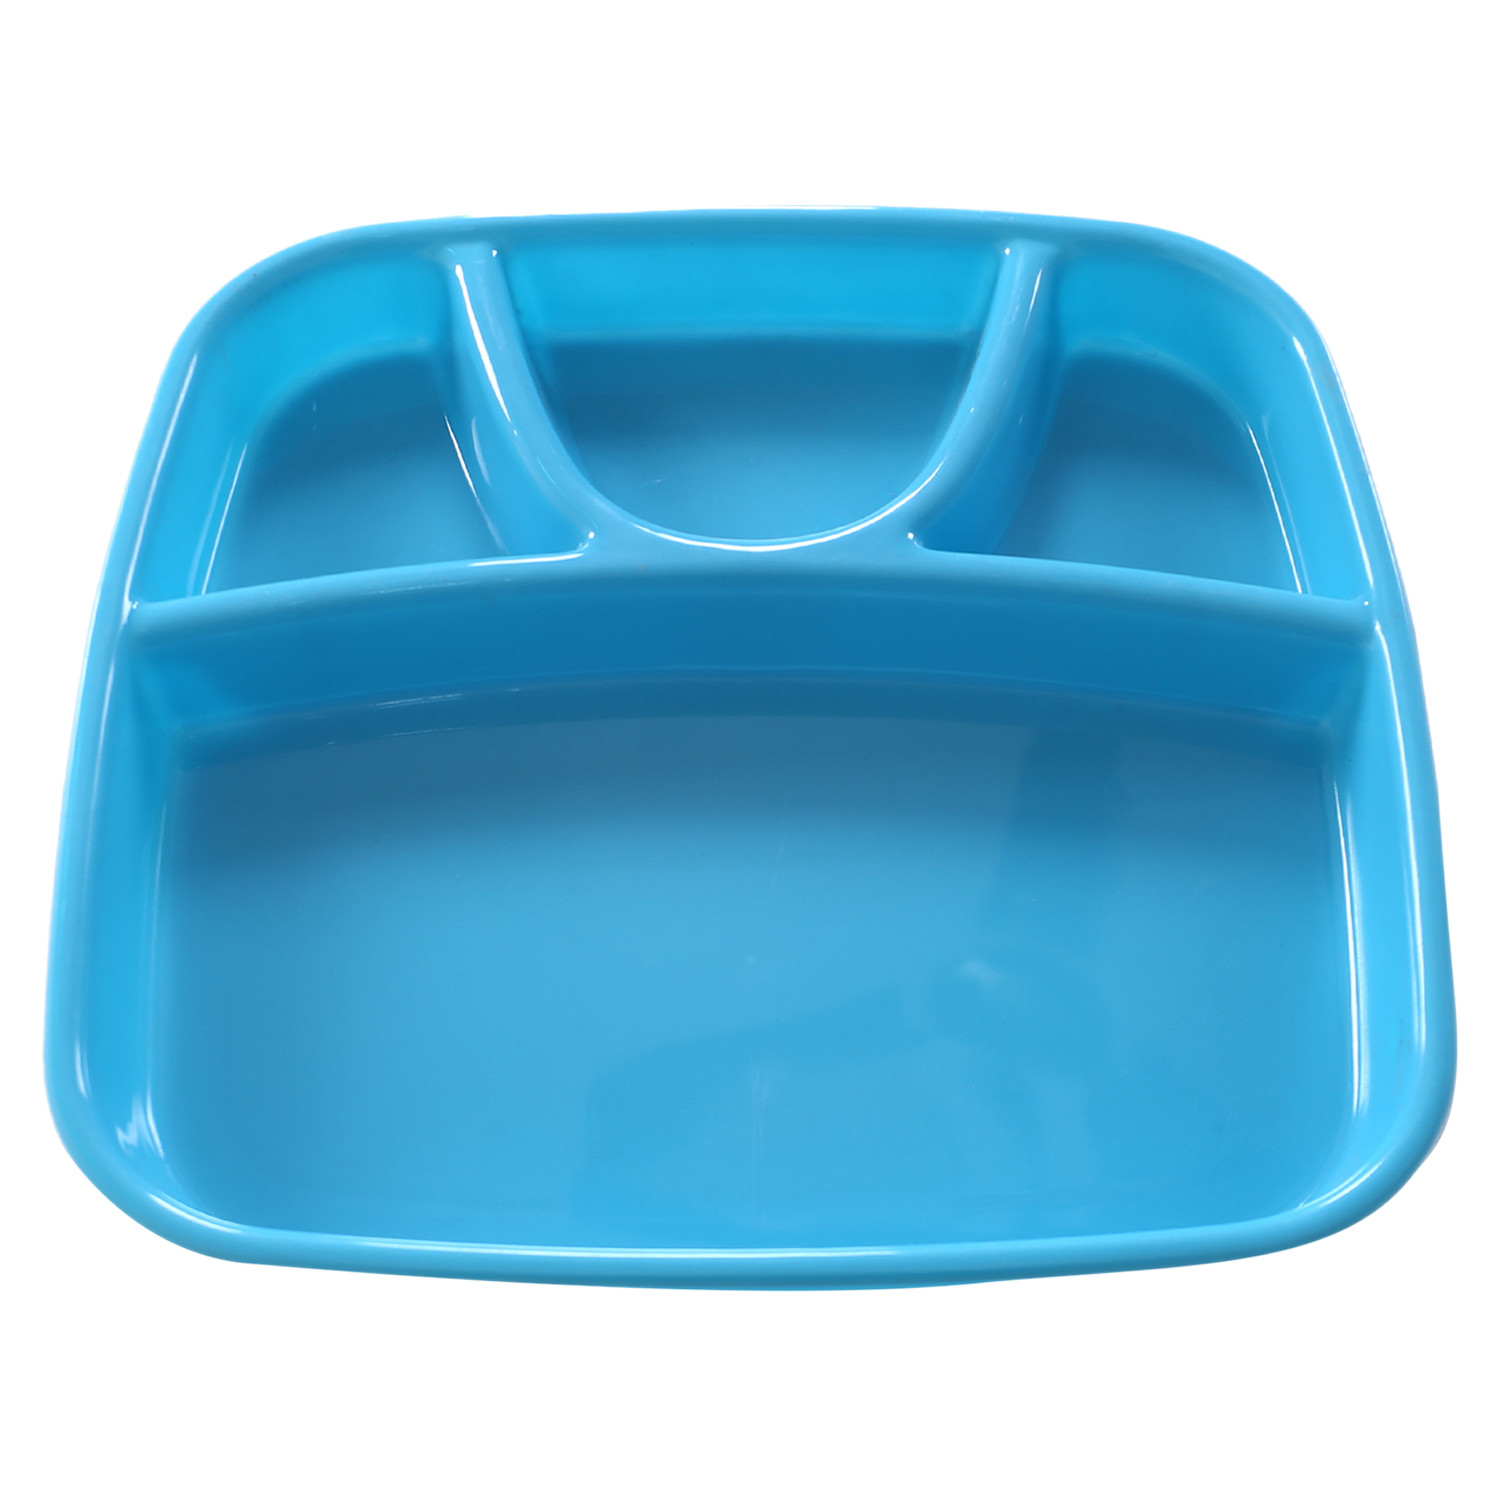 Kuber Industries Serving Plate|Plate Set For Dinner|Unbreakable Plastic Plates|Microwave Safe Plates|Food Organizer With 4 Partitions|(Sky Blue)